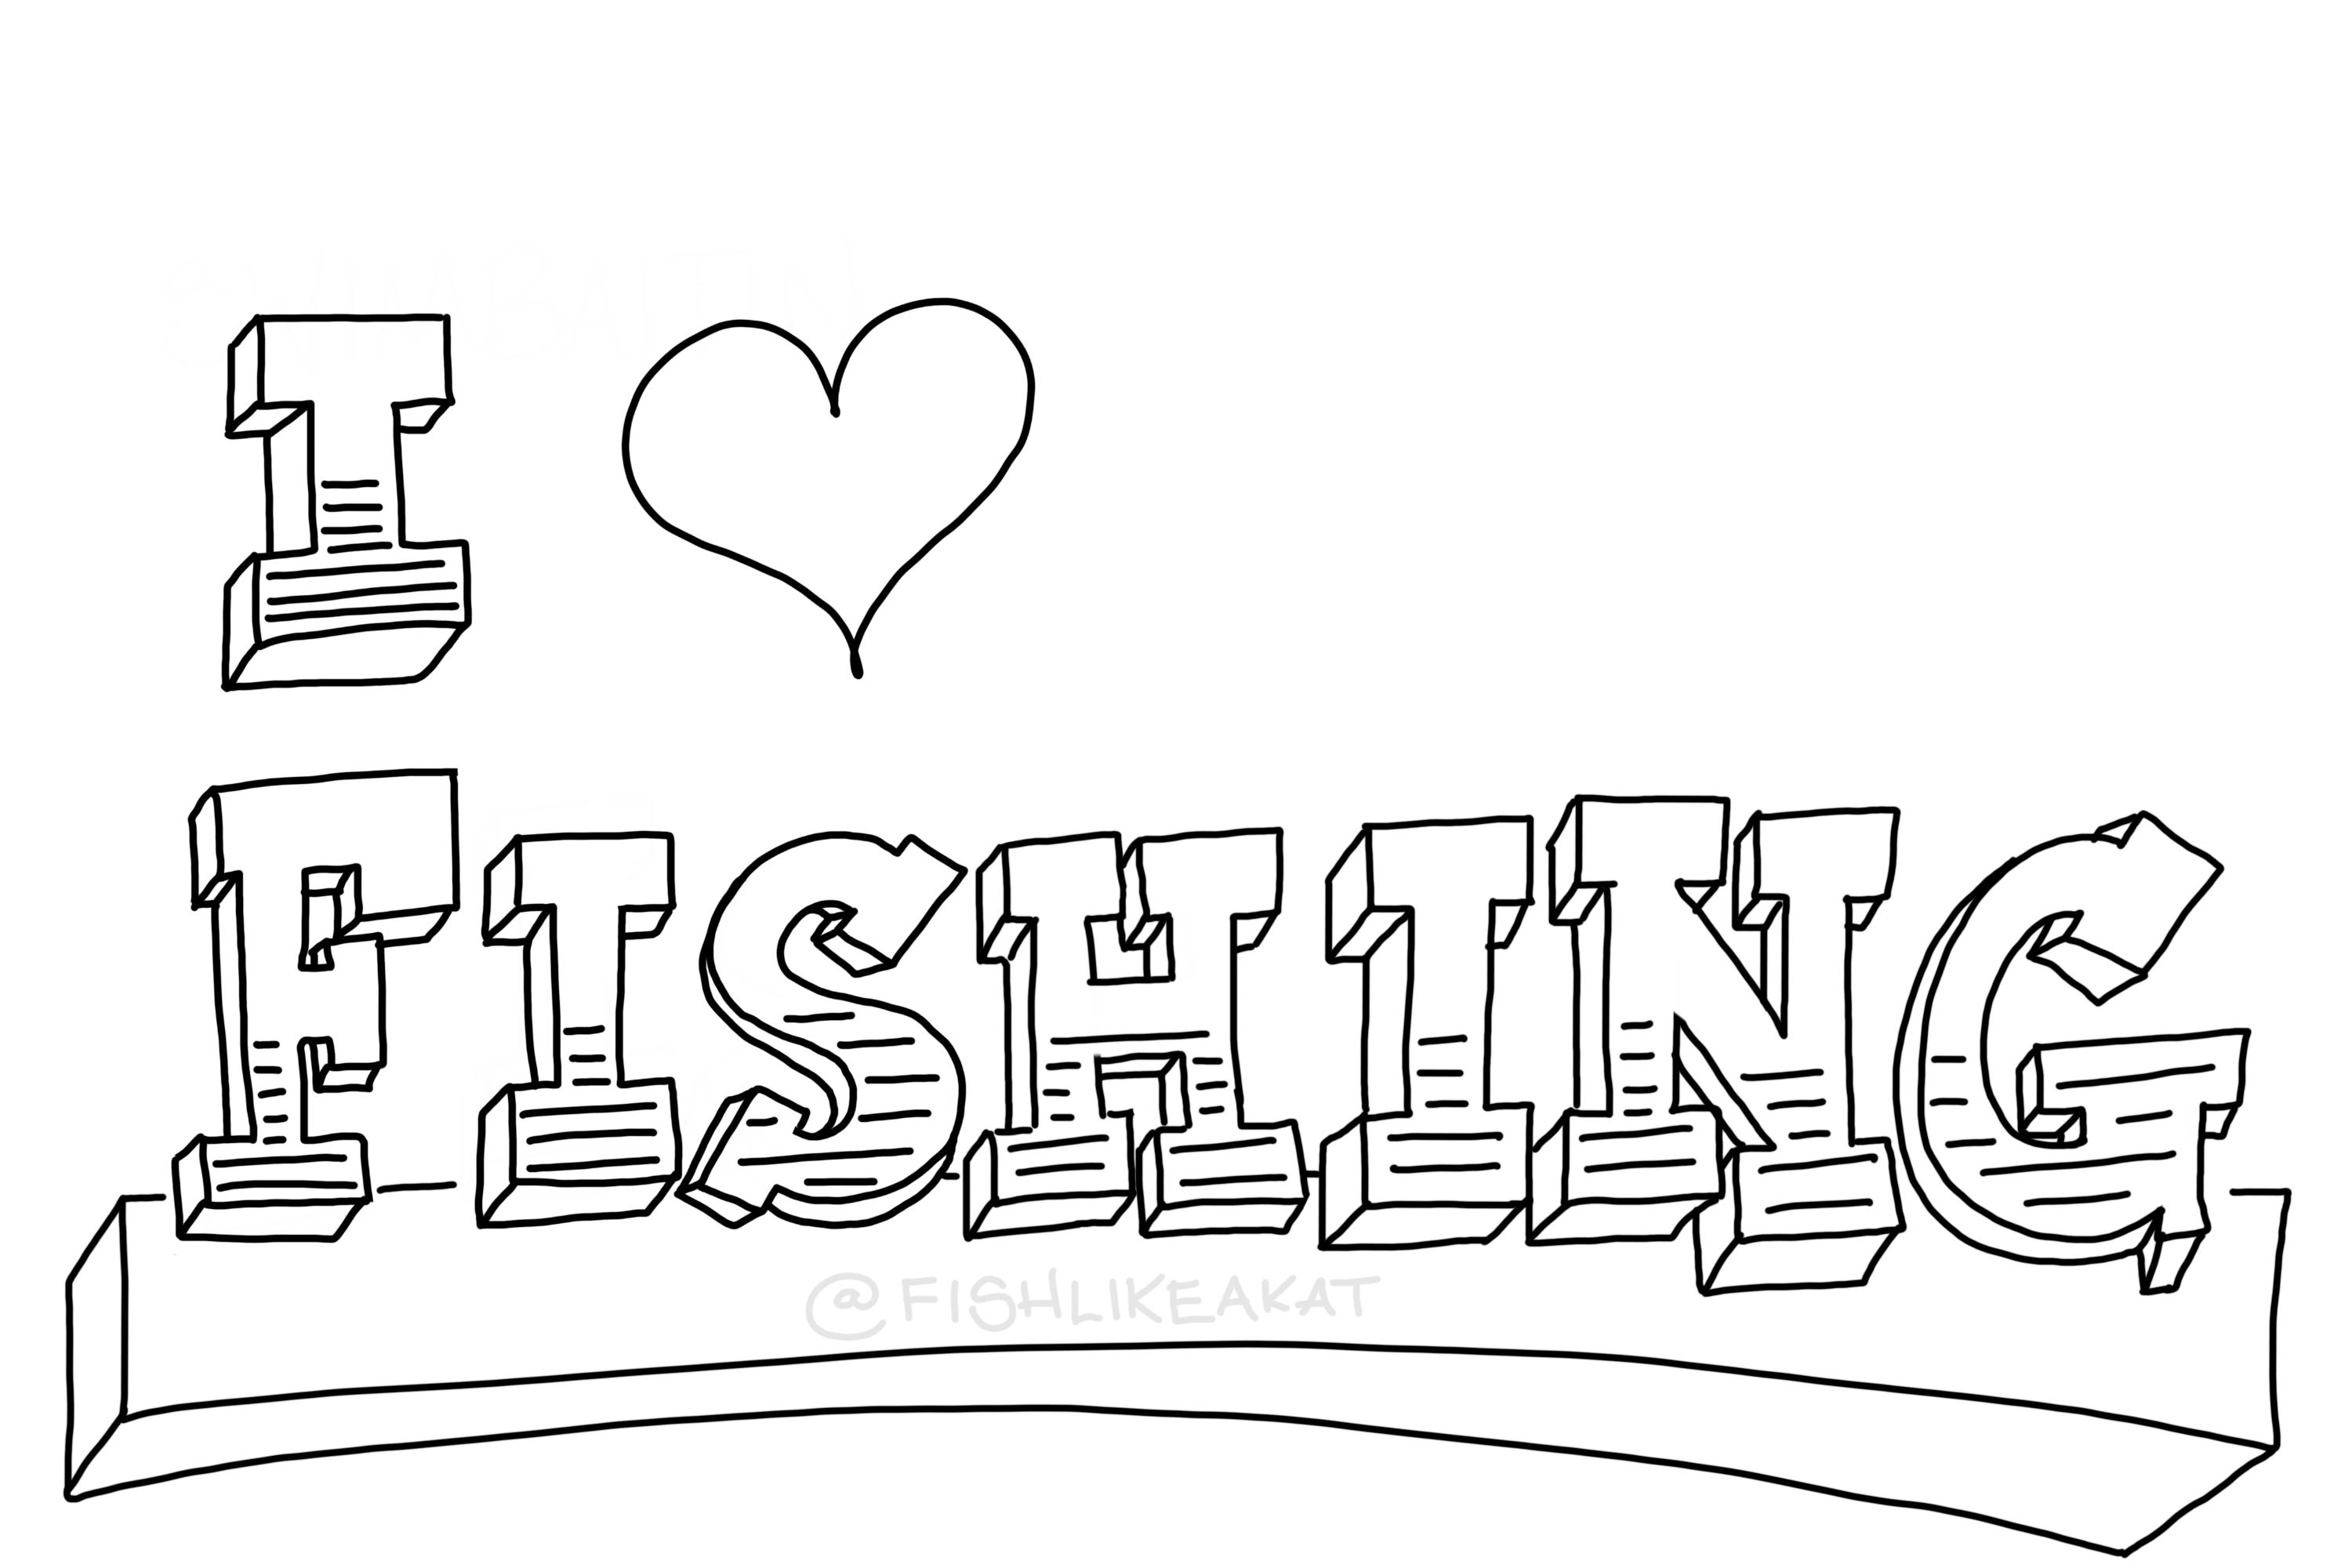 Coloring page with text: I heart fishing